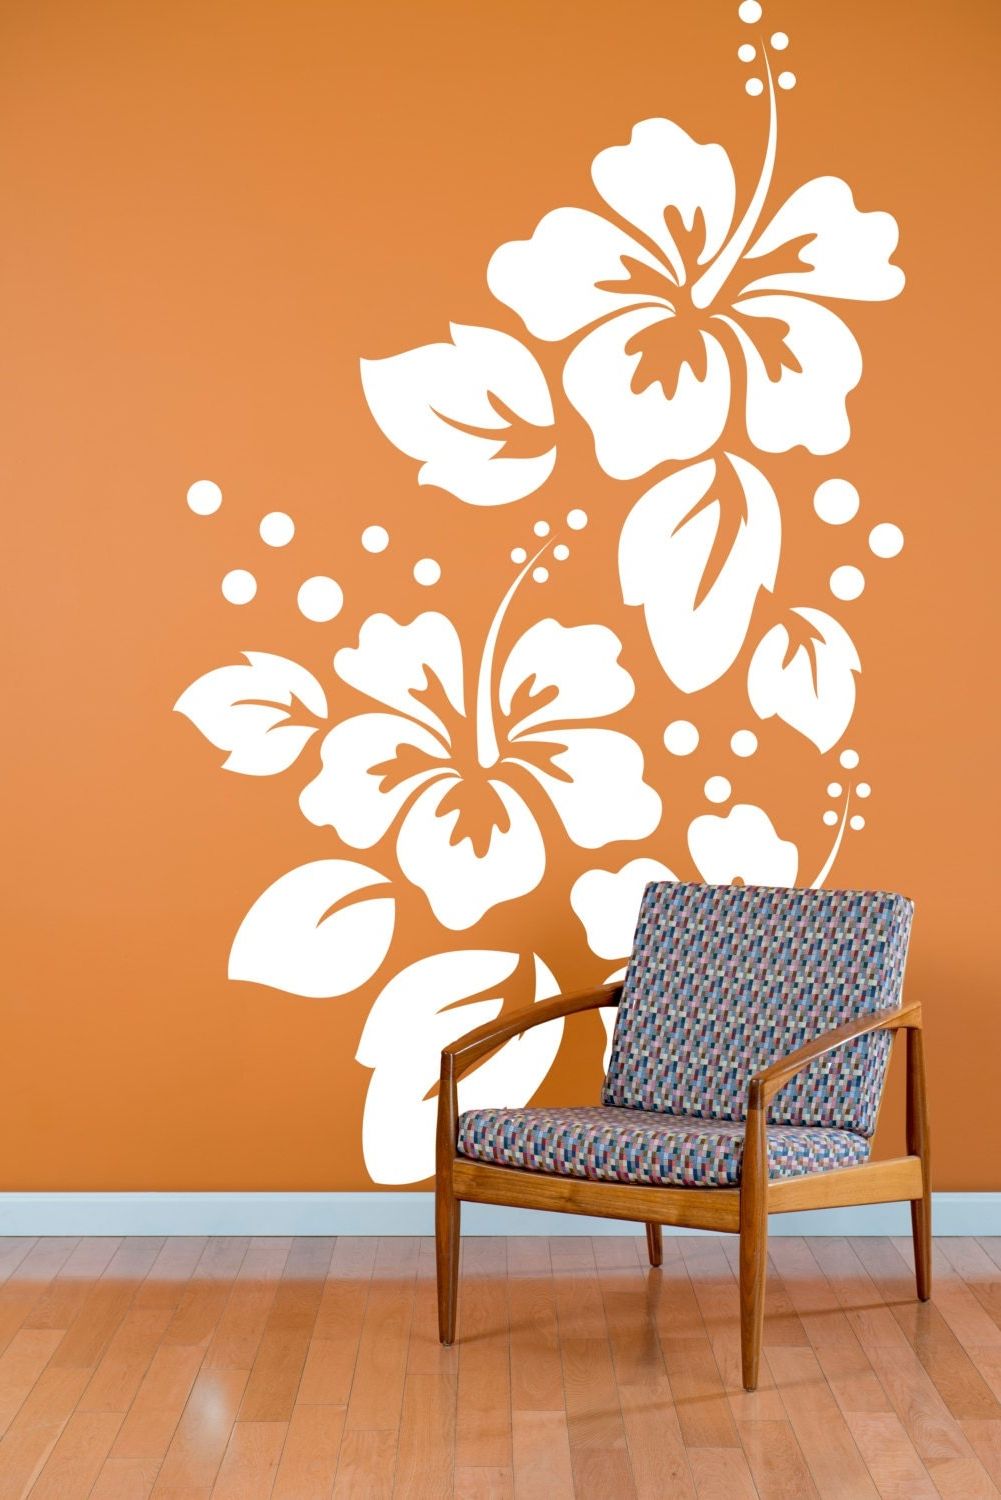 2018 Large Hibiscus Flowers Pattern Wall Decal Custom Vinyl Art Intended For Stripes Wall Art (View 14 of 20)